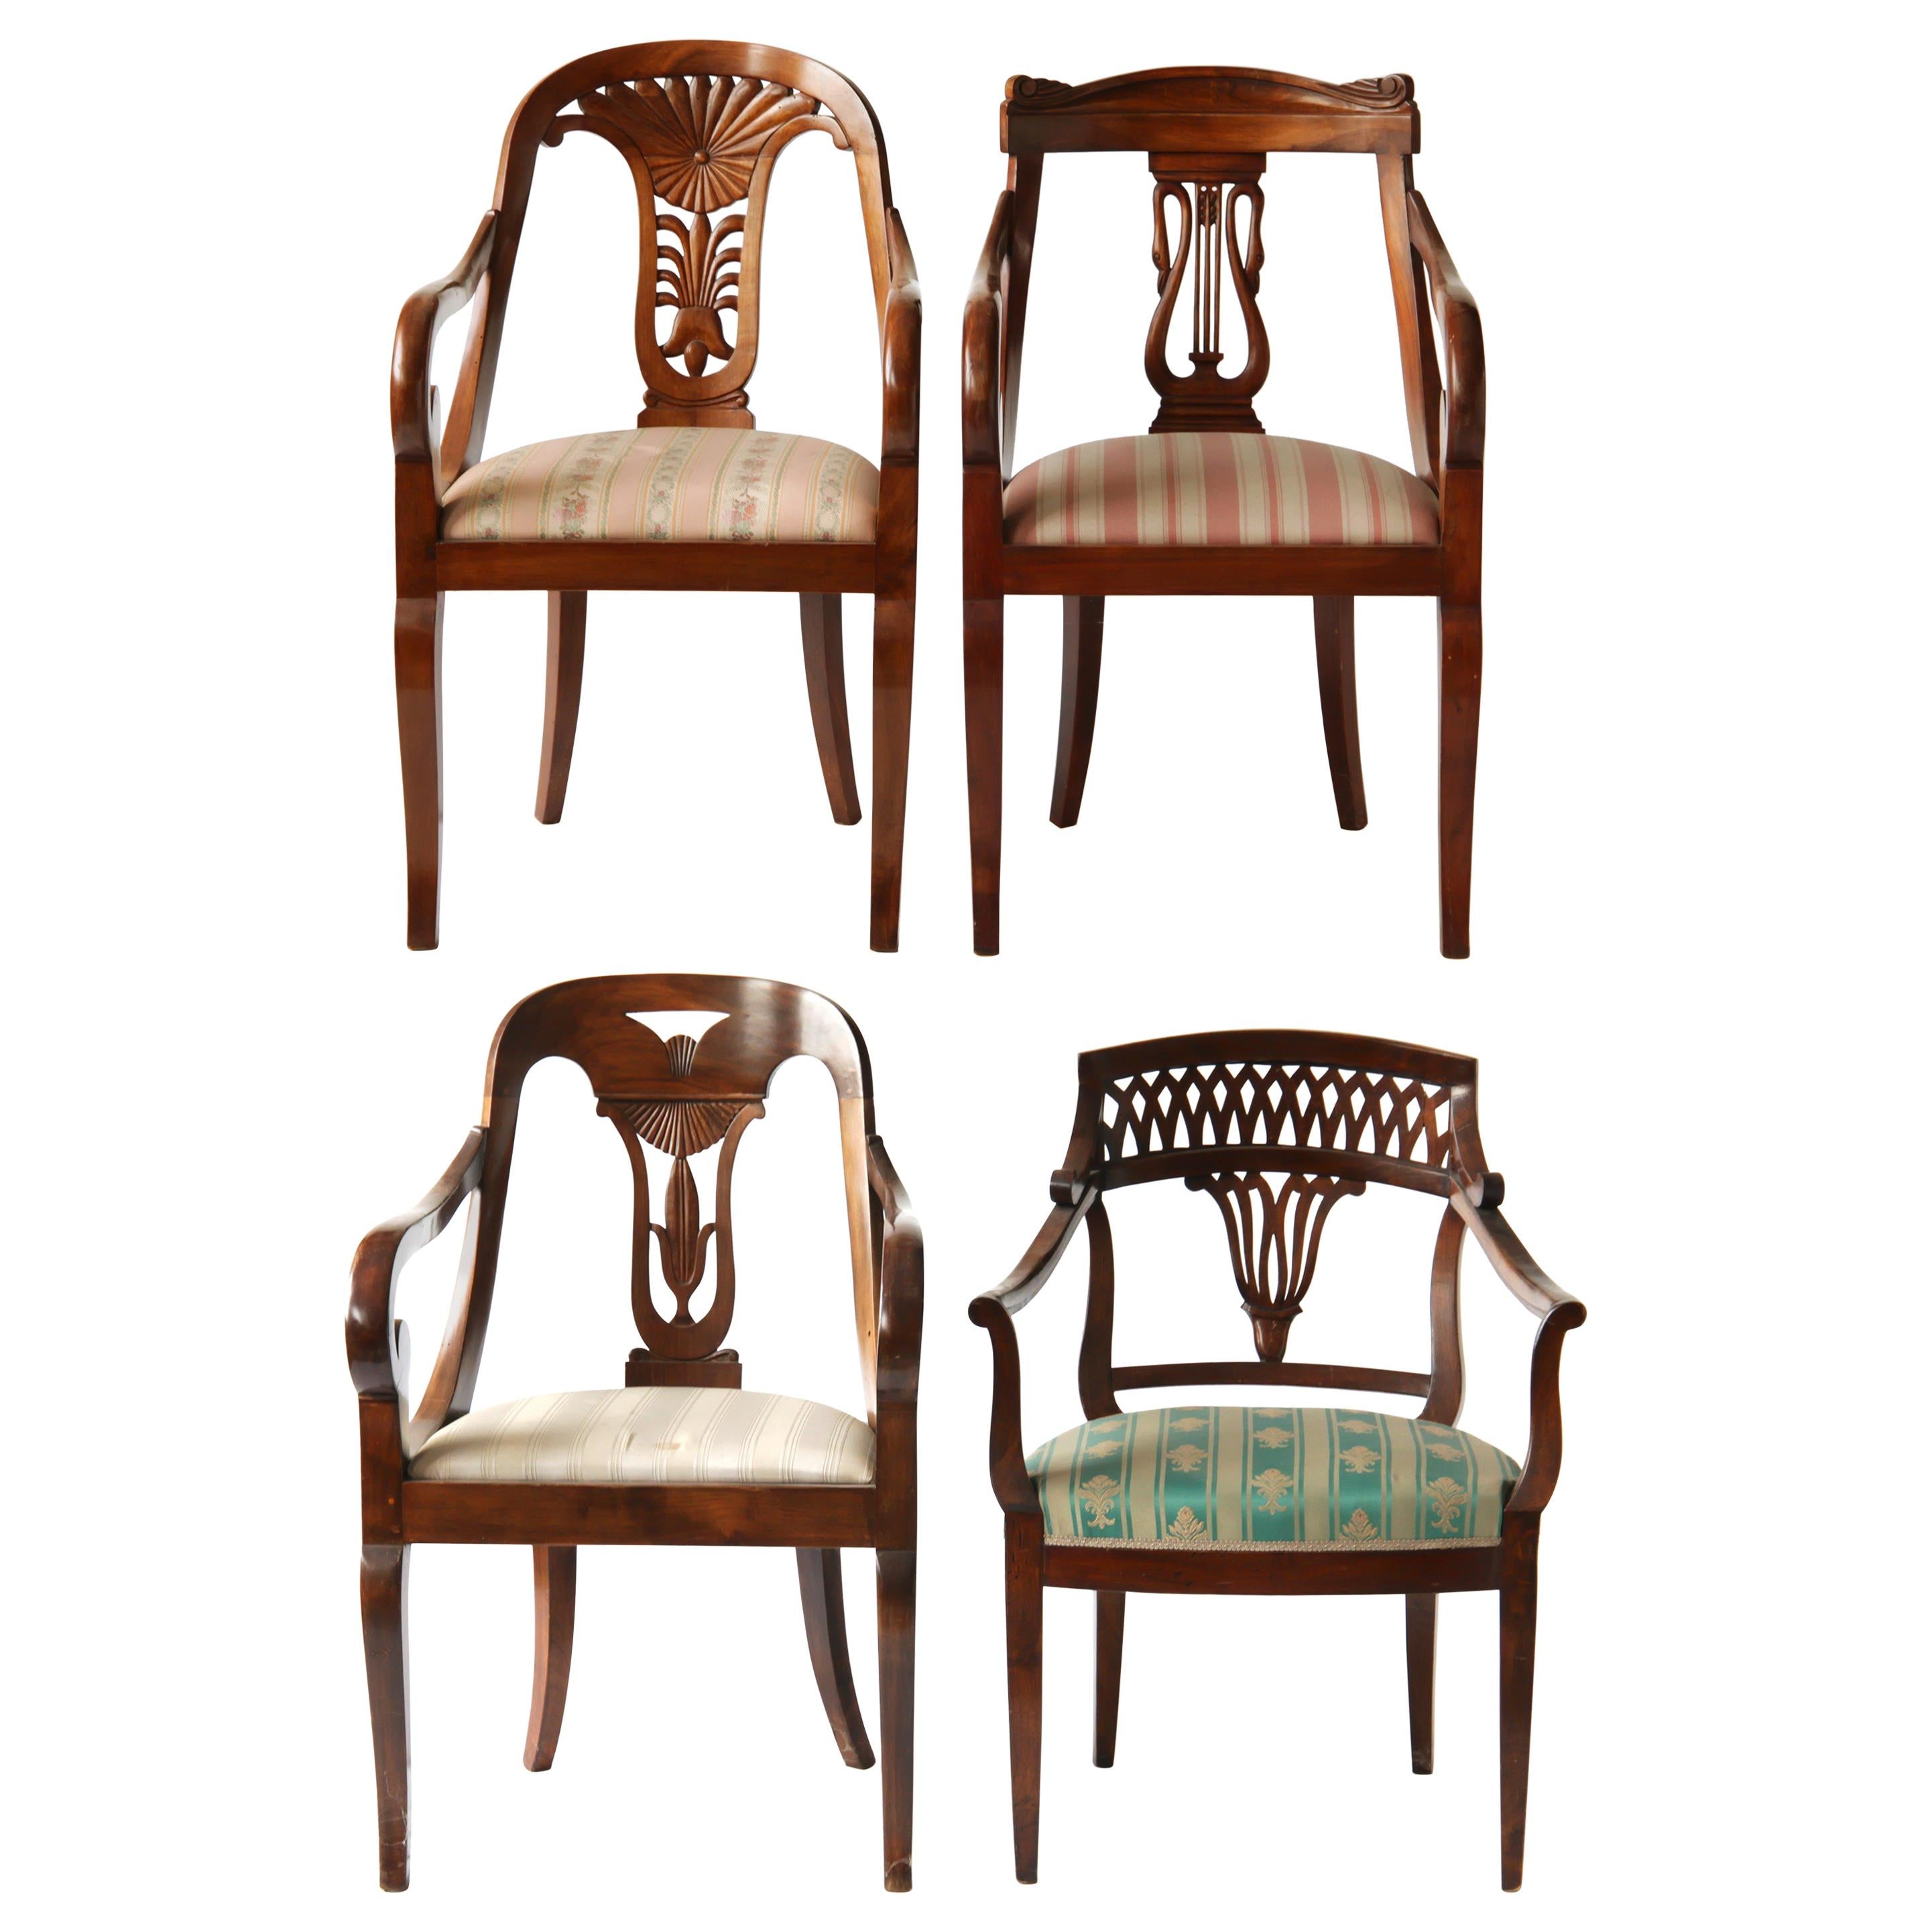 Empire Eclectic Set, Unique Set of 4 Armchairs Each in Different Design